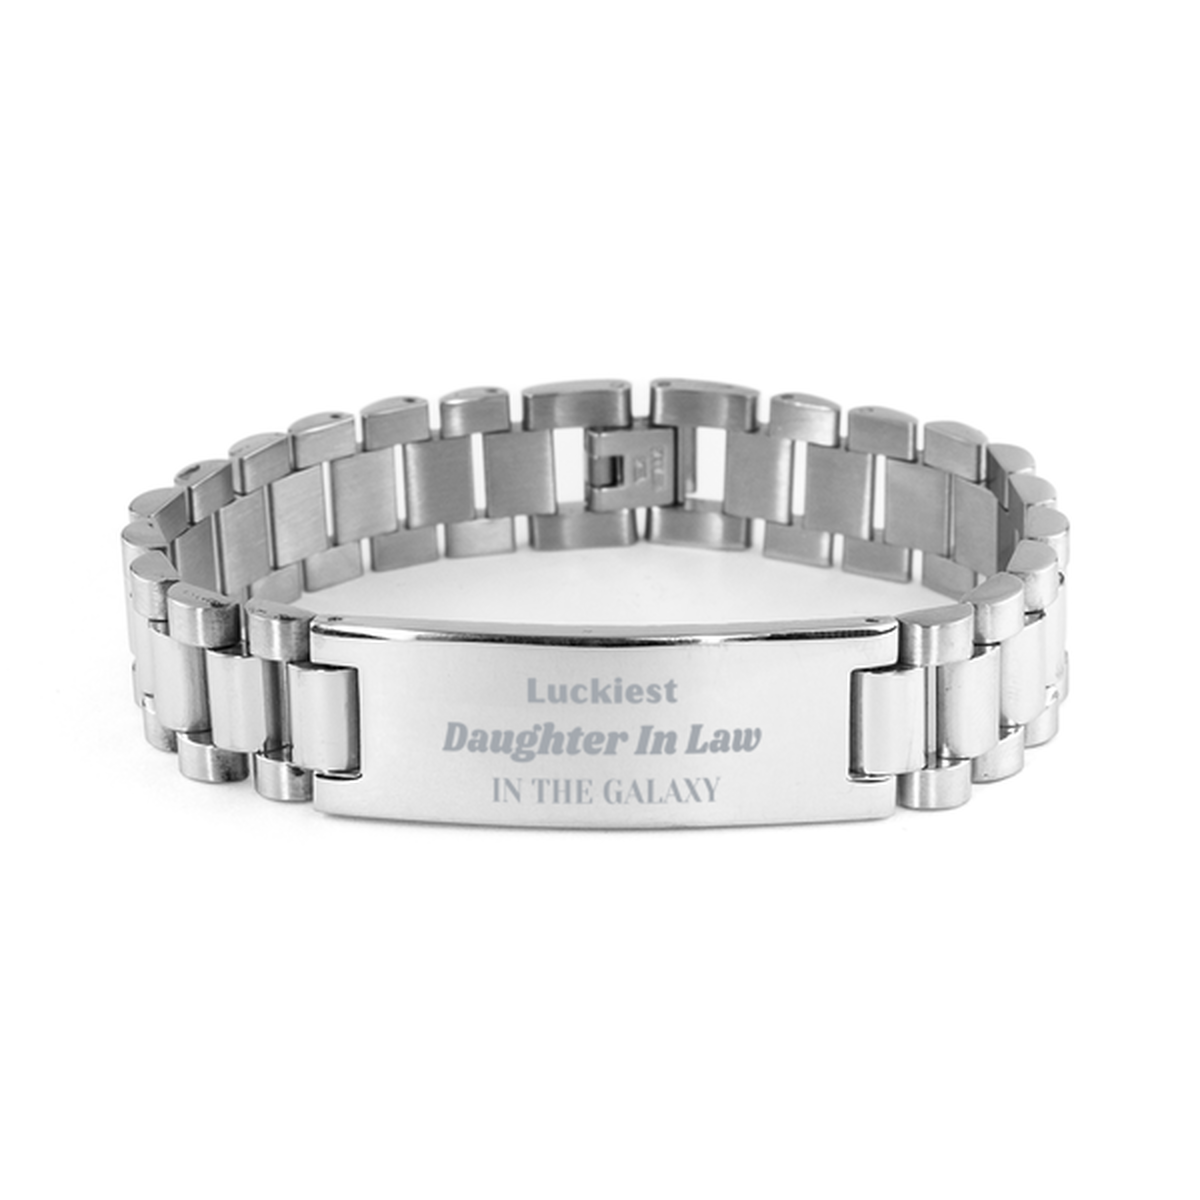 Luckiest Daughter In Law in the Galaxy, To My Daughter In Law Engraved Gifts, Christmas Daughter In Law Ladder Stainless Steel Bracelet Gifts, X-mas Birthday Unique Gifts For Daughter In Law Men Women